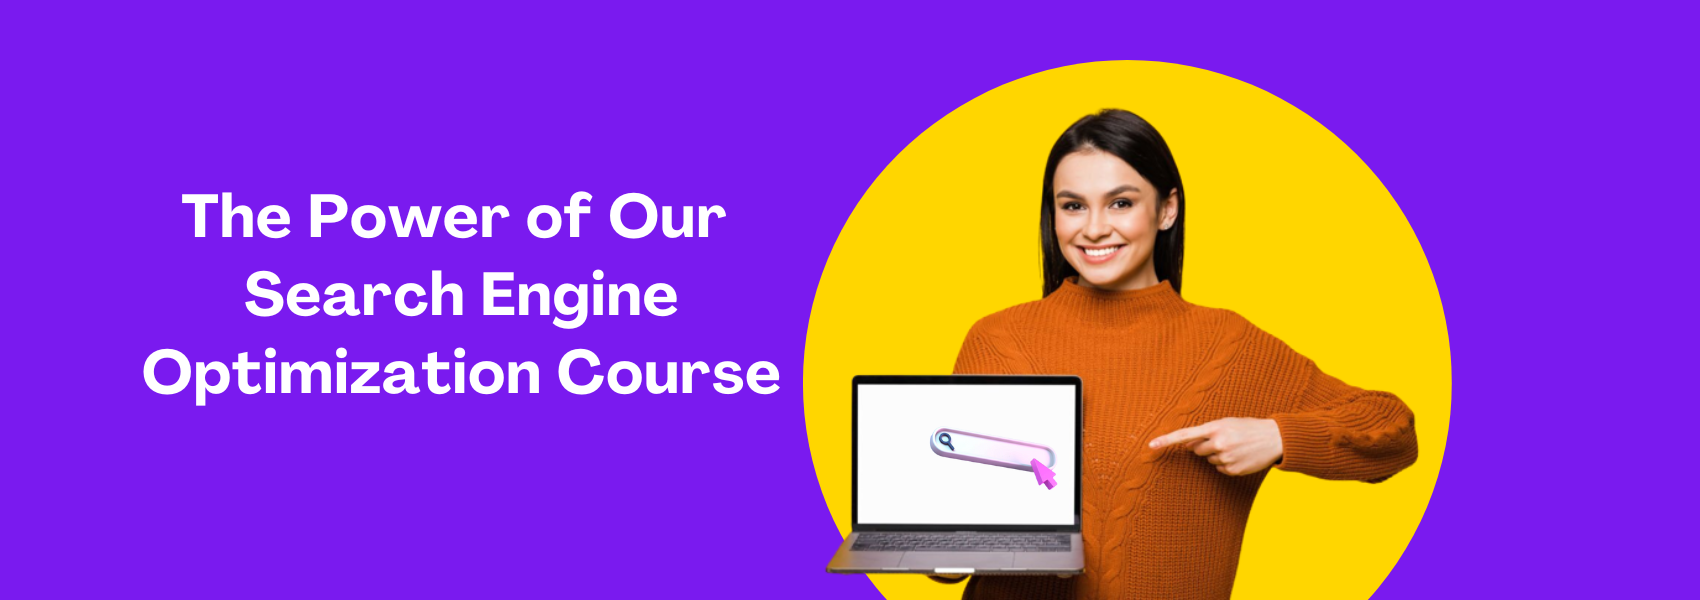 The Power of Our Search Engine Optimization Course